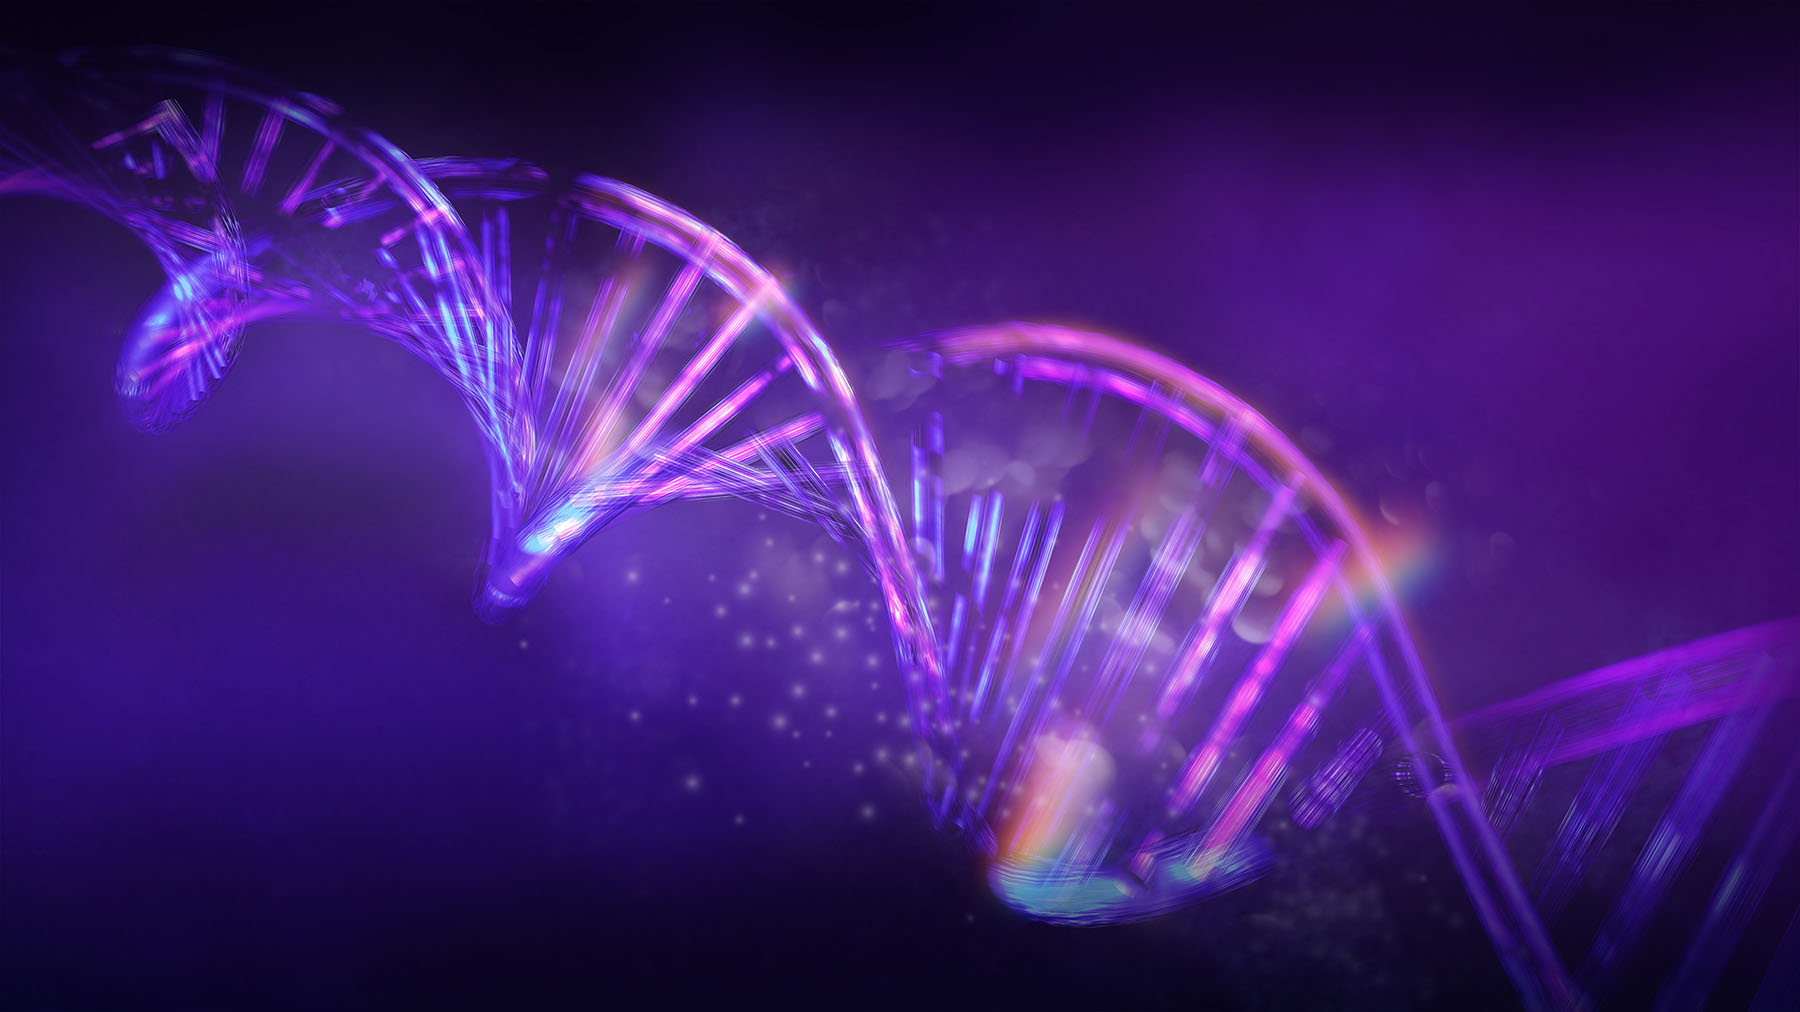 DNA helix with glowing purple light